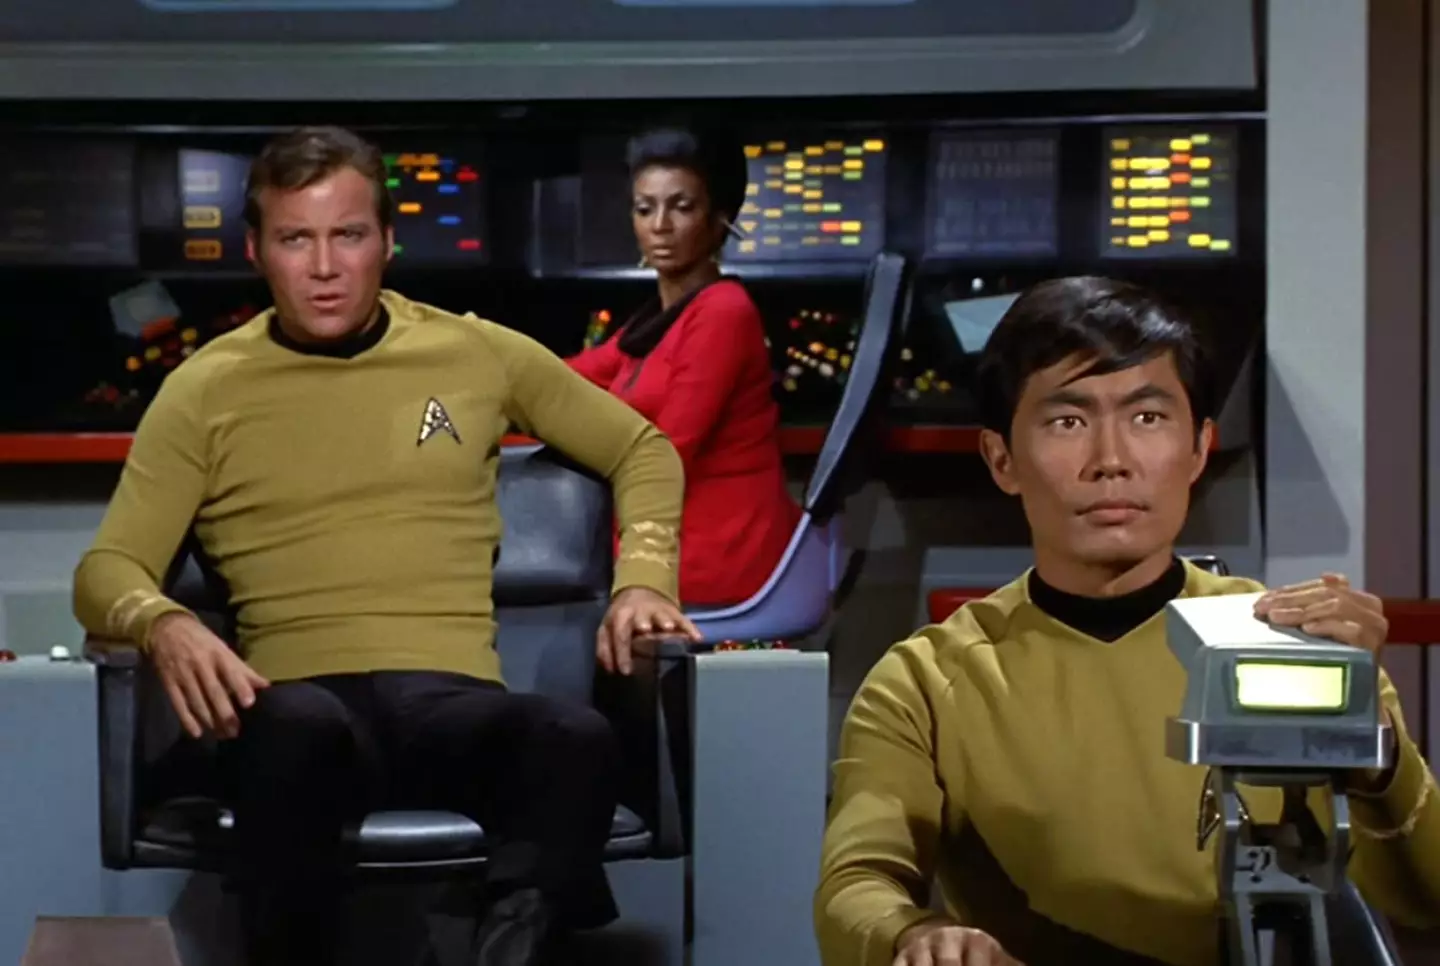 Shatner and Takei starred together in Star Trek.